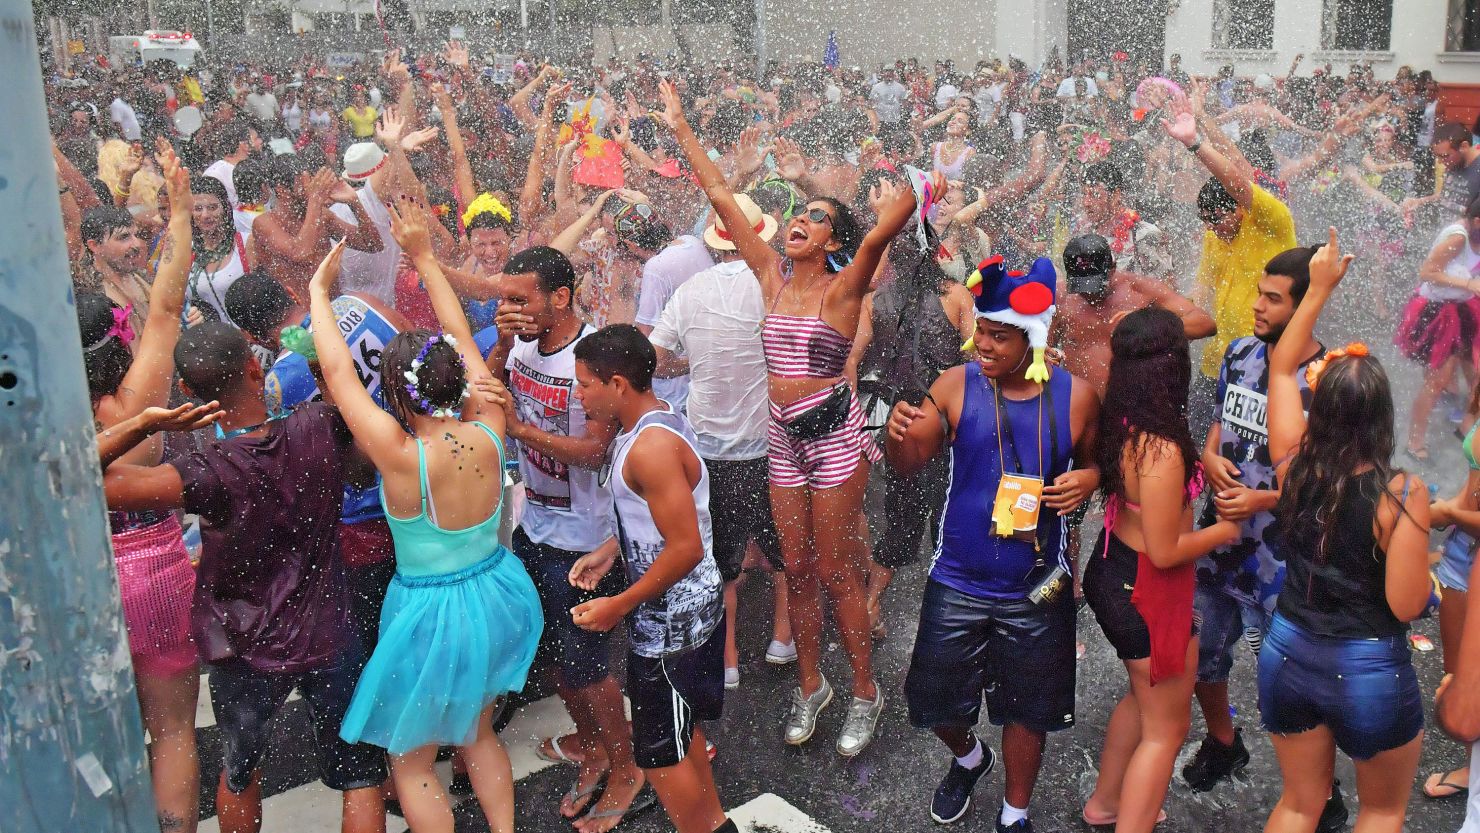 Revelers are sprayed by a water canon during a "bloco" or street party in Rio de Janeiro, Brazil on February 4, 2018.